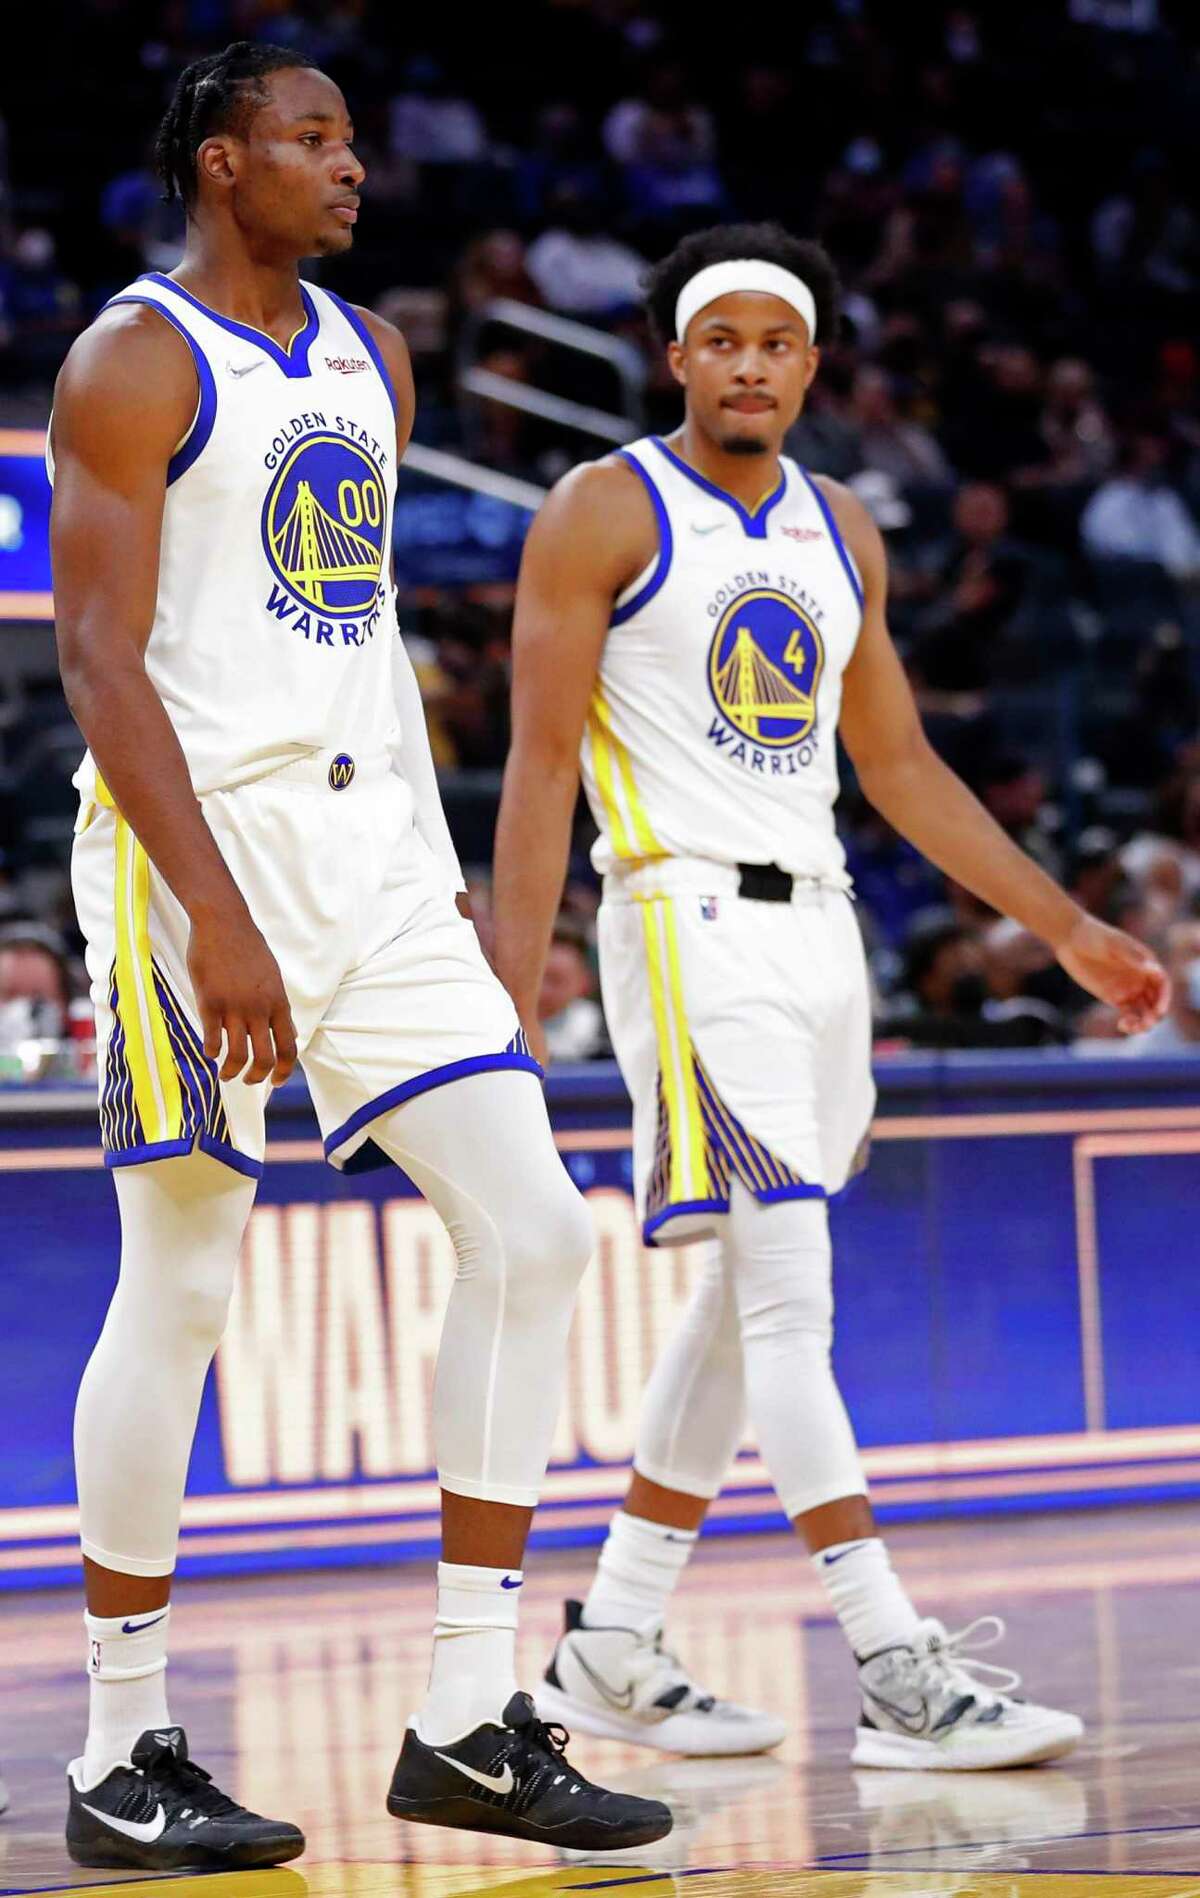 Golden State Warriors' Jonathan Kuminga and Moses Moody in 3rd quarter of Warriors' 118-116 win over Denver Nuggets during NBA preseason game at Chase Center in San Francisco, Calif., on Wednesday, October 6, 2021.